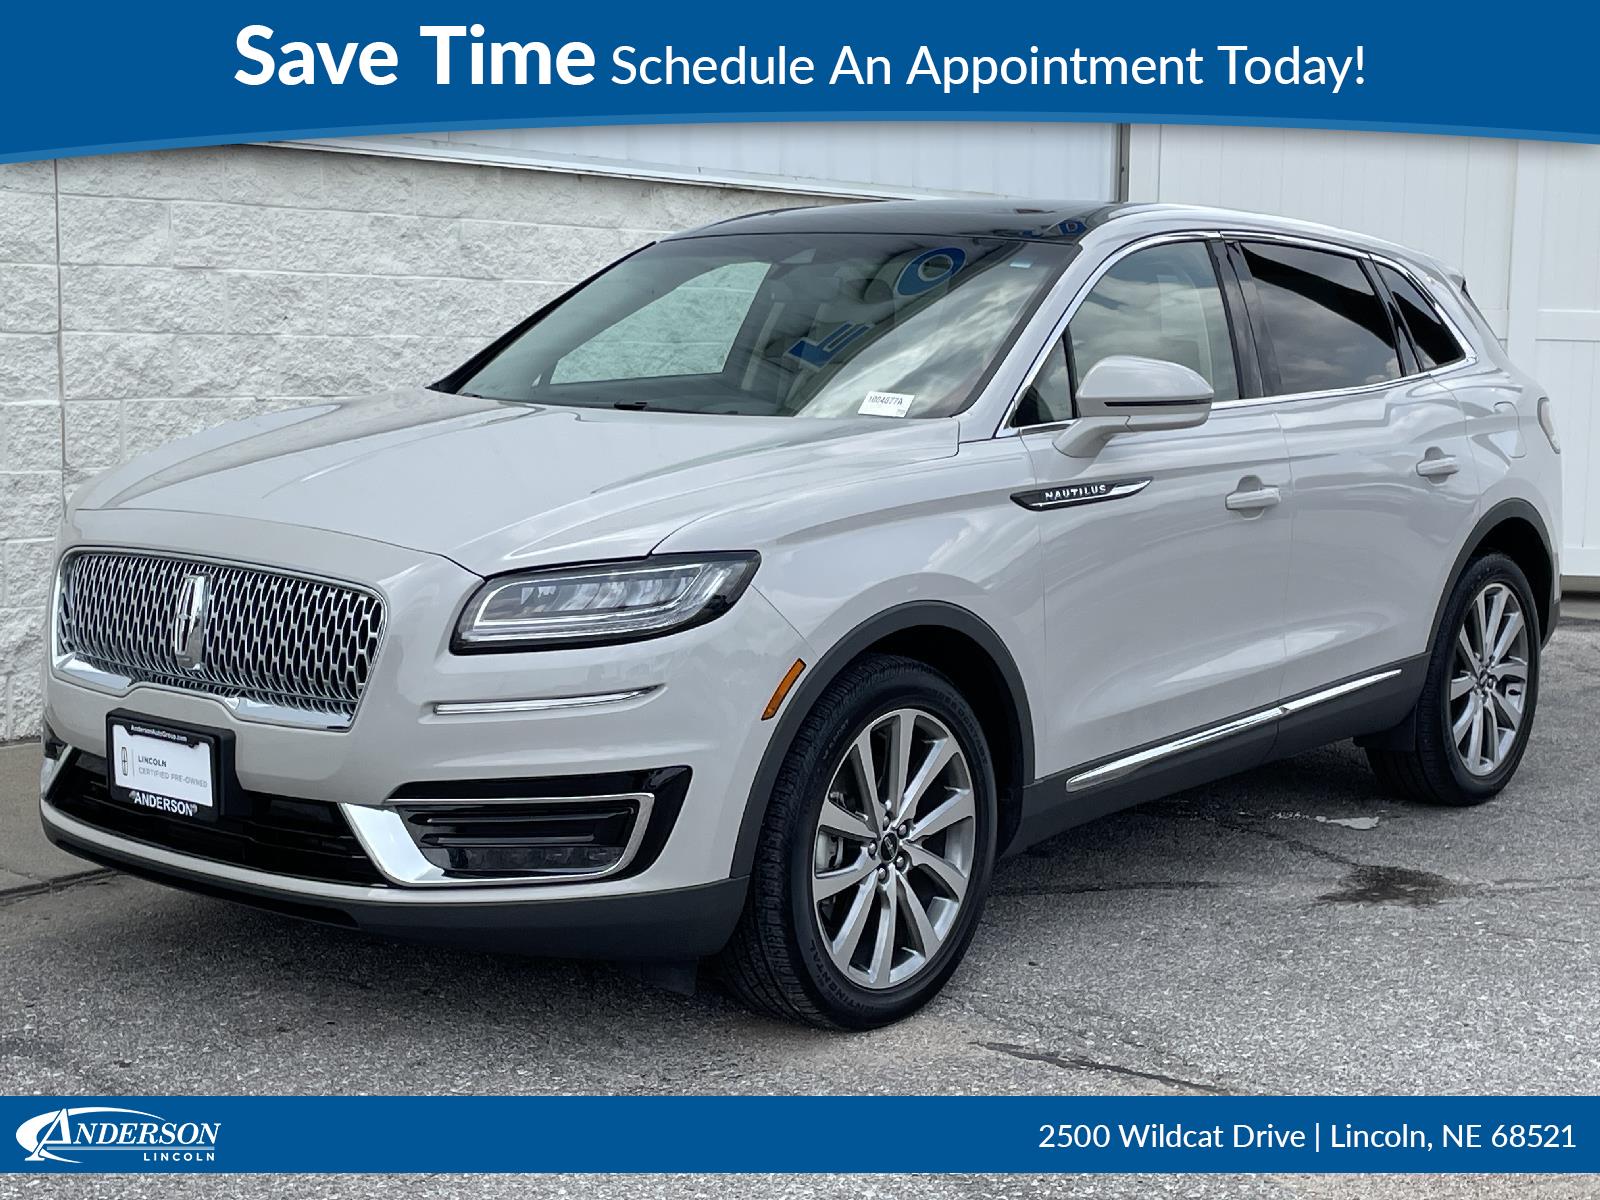 Used 2019 Lincoln Nautilus Select Stock: 1004077a